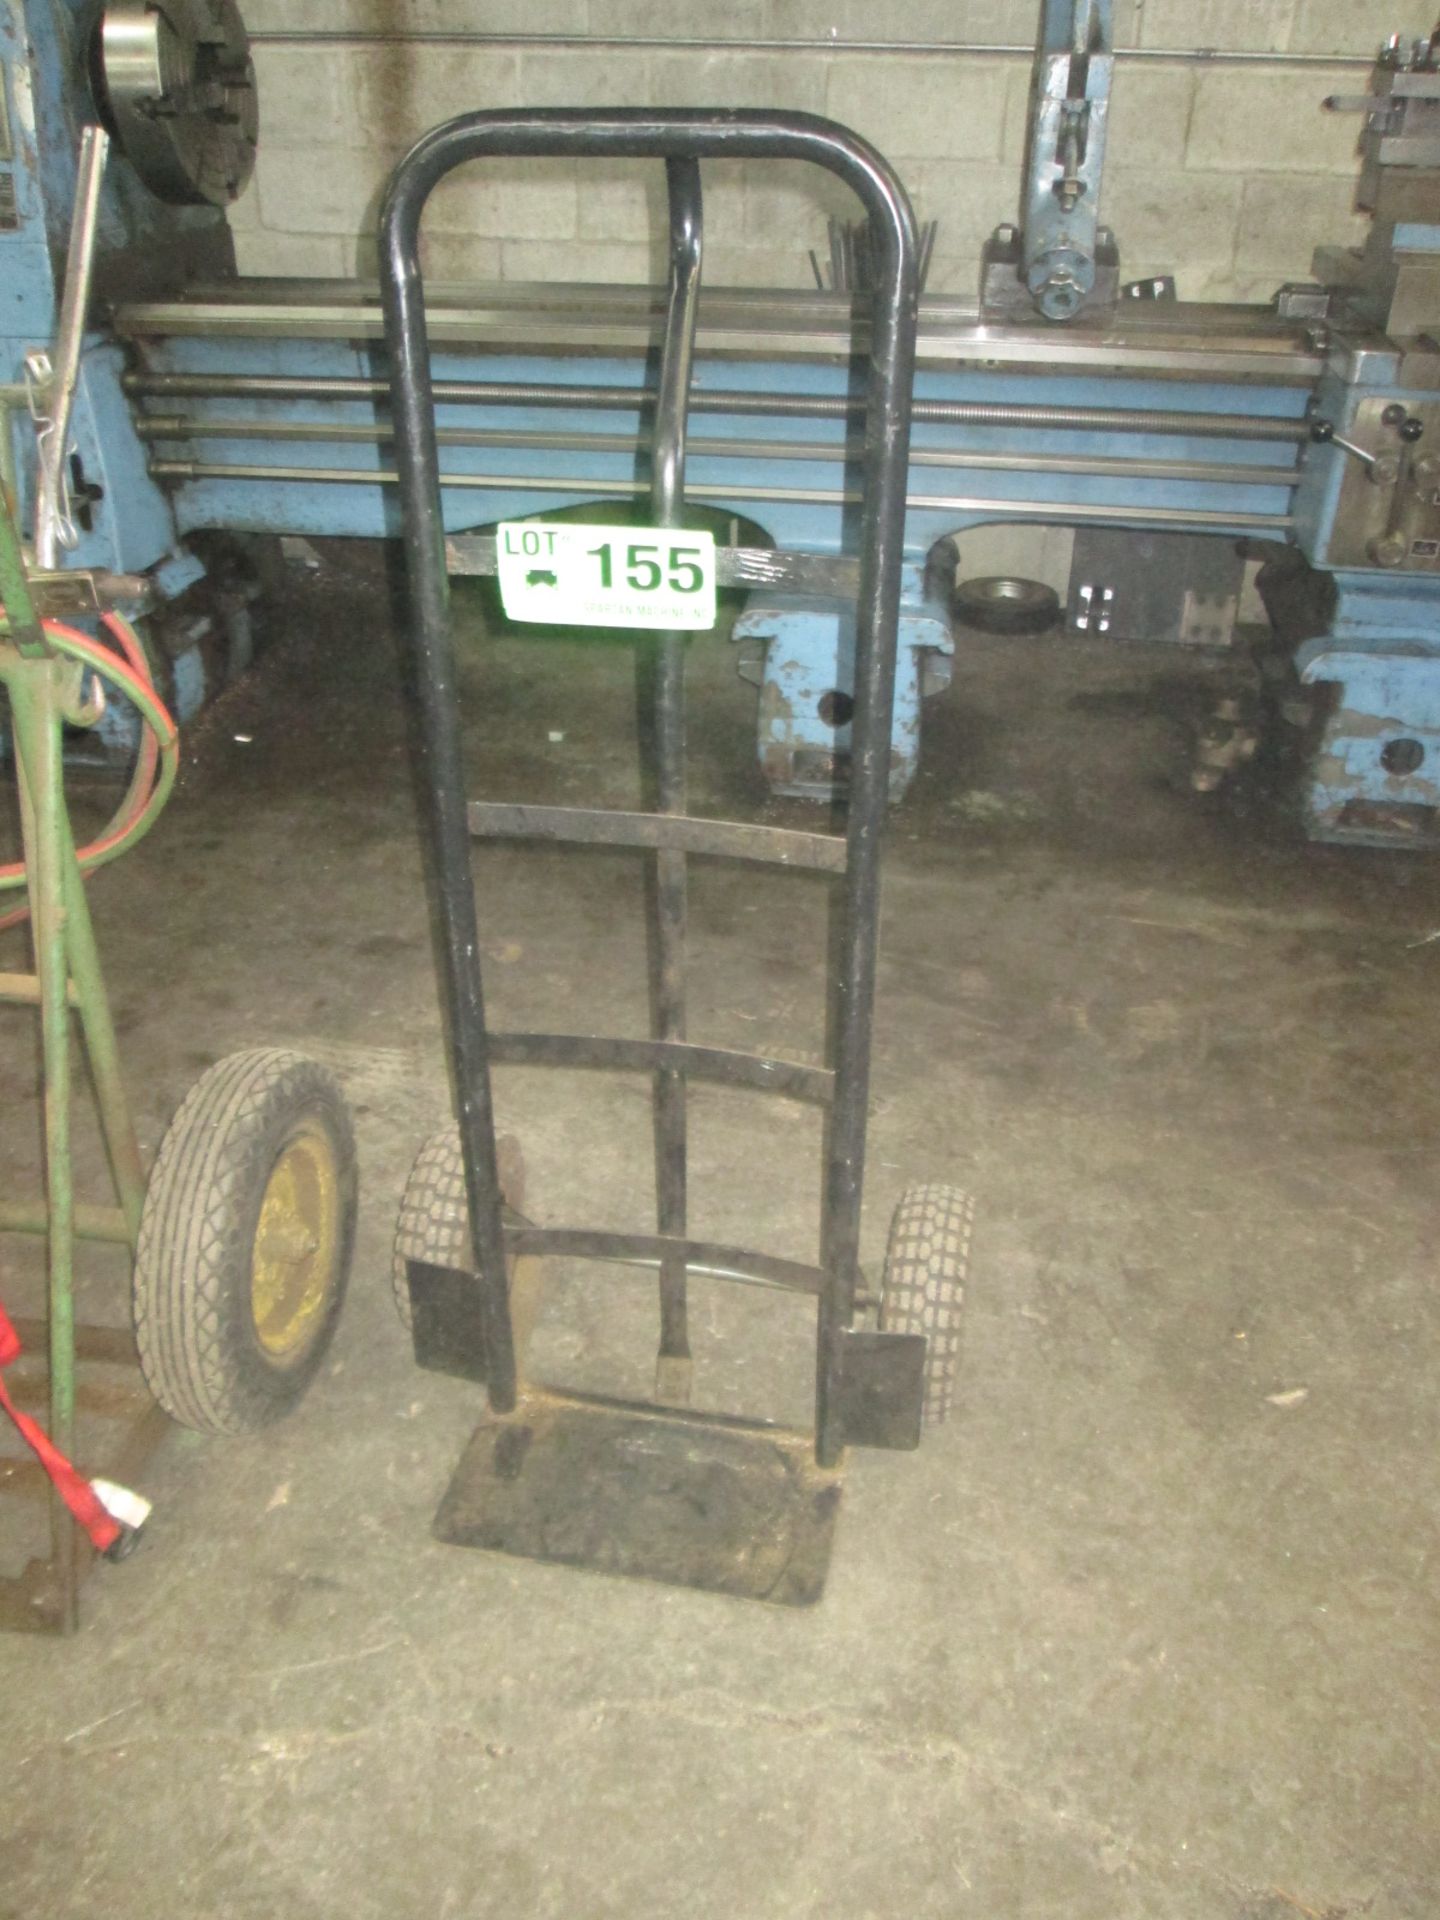 2 WHEEL DOLLY WITH INFLATEABLE TIRES